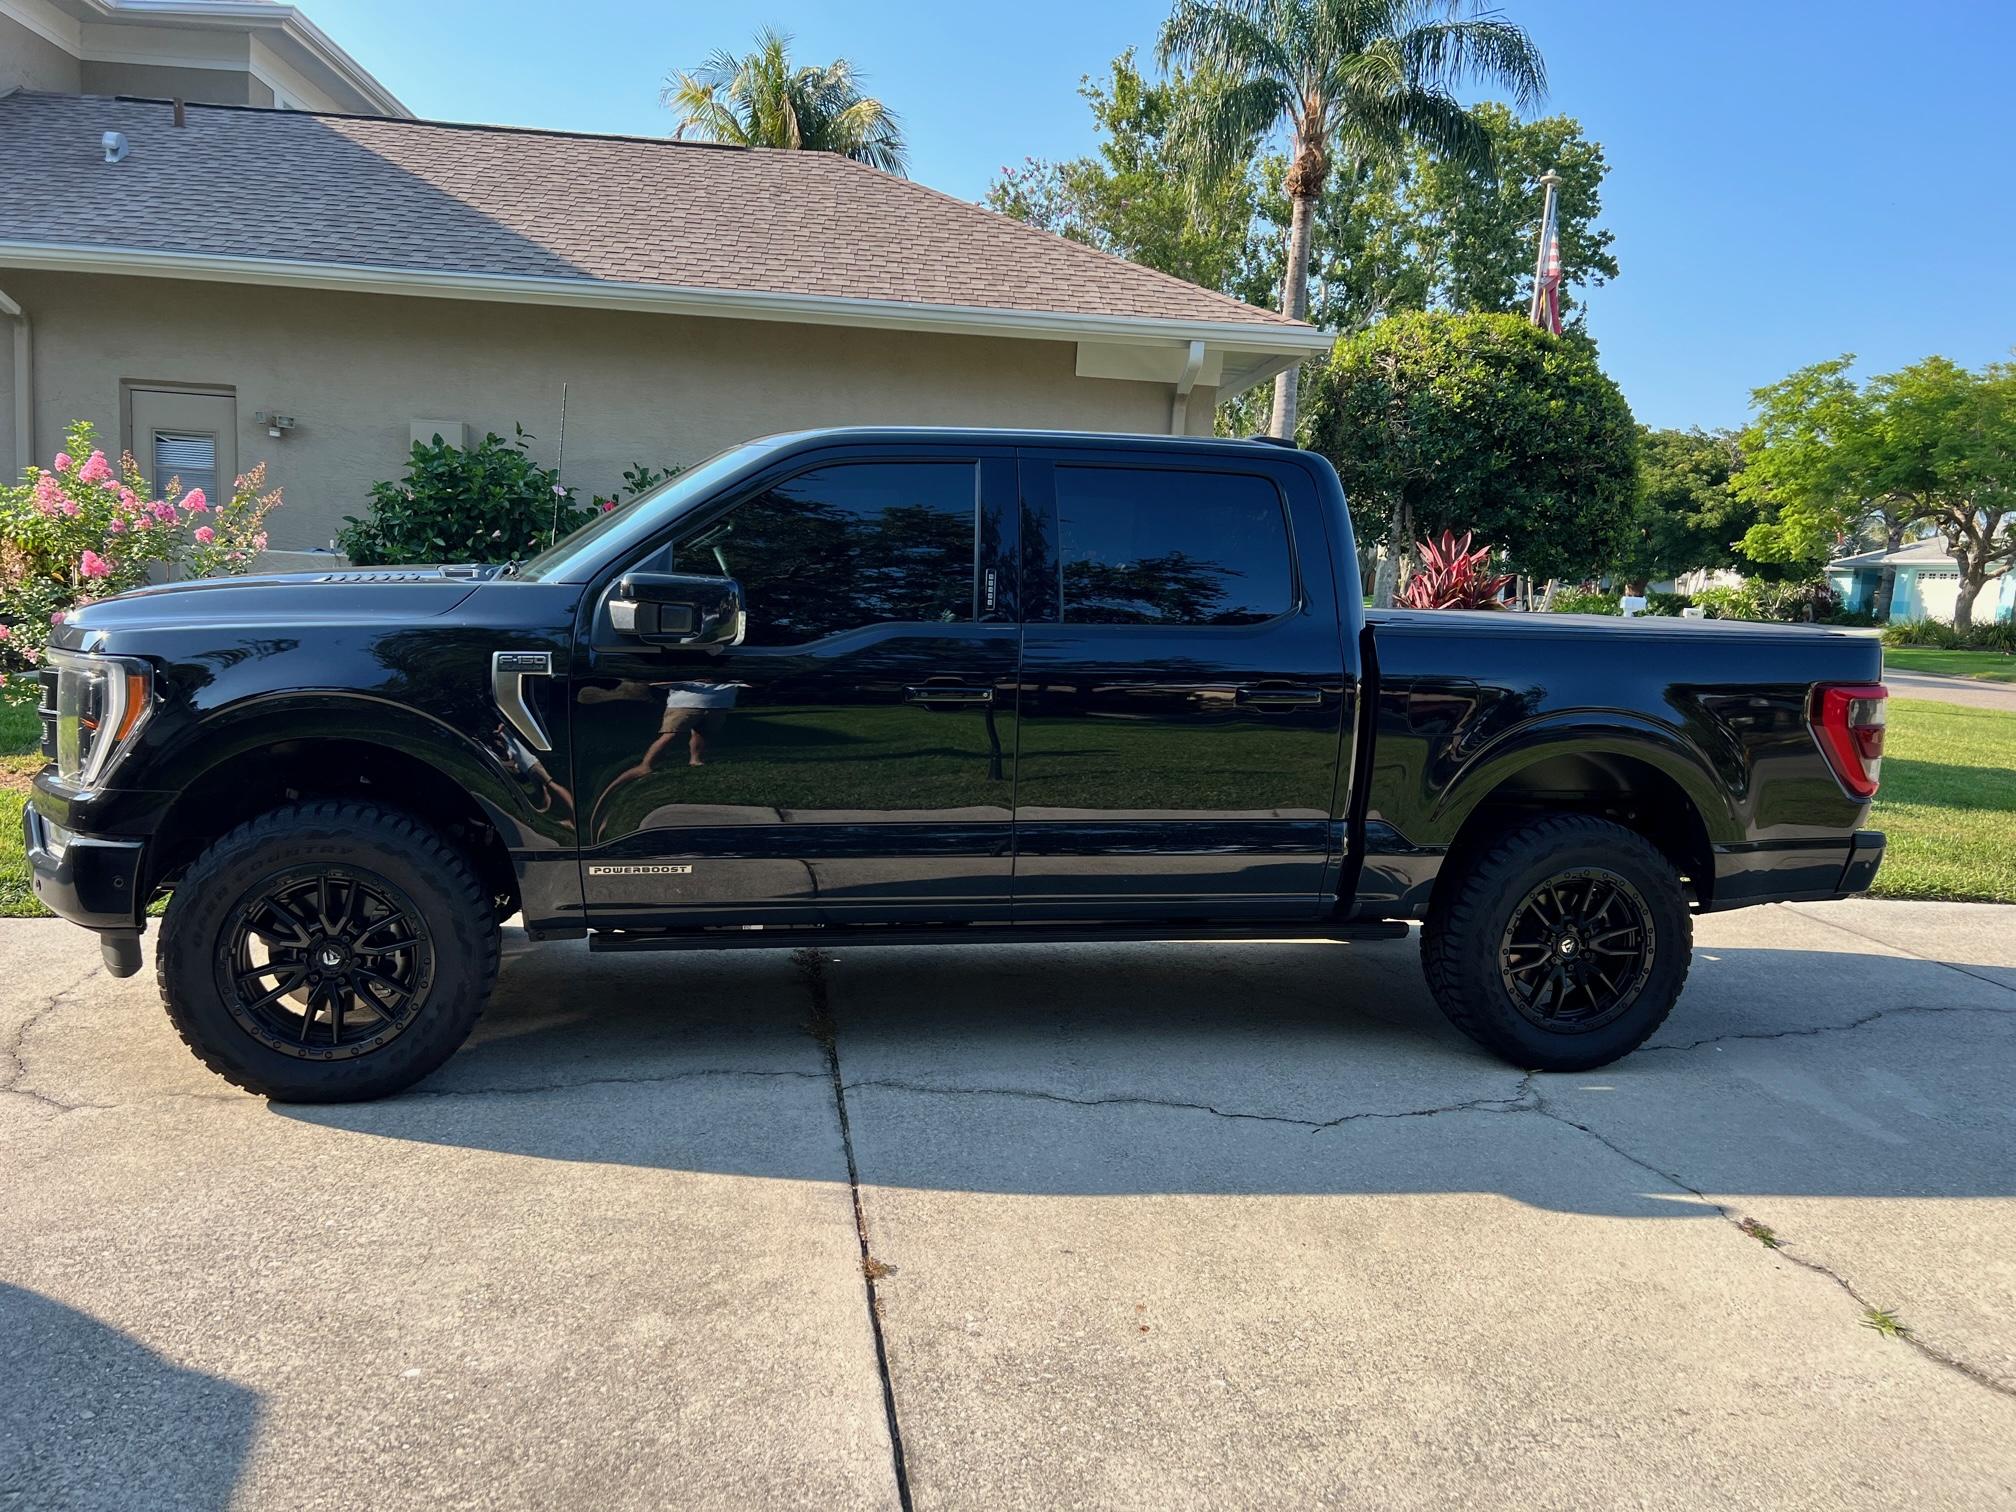 Ford F-150 BAP Black Appearance Package Trucks, POST HERE Truck Driver